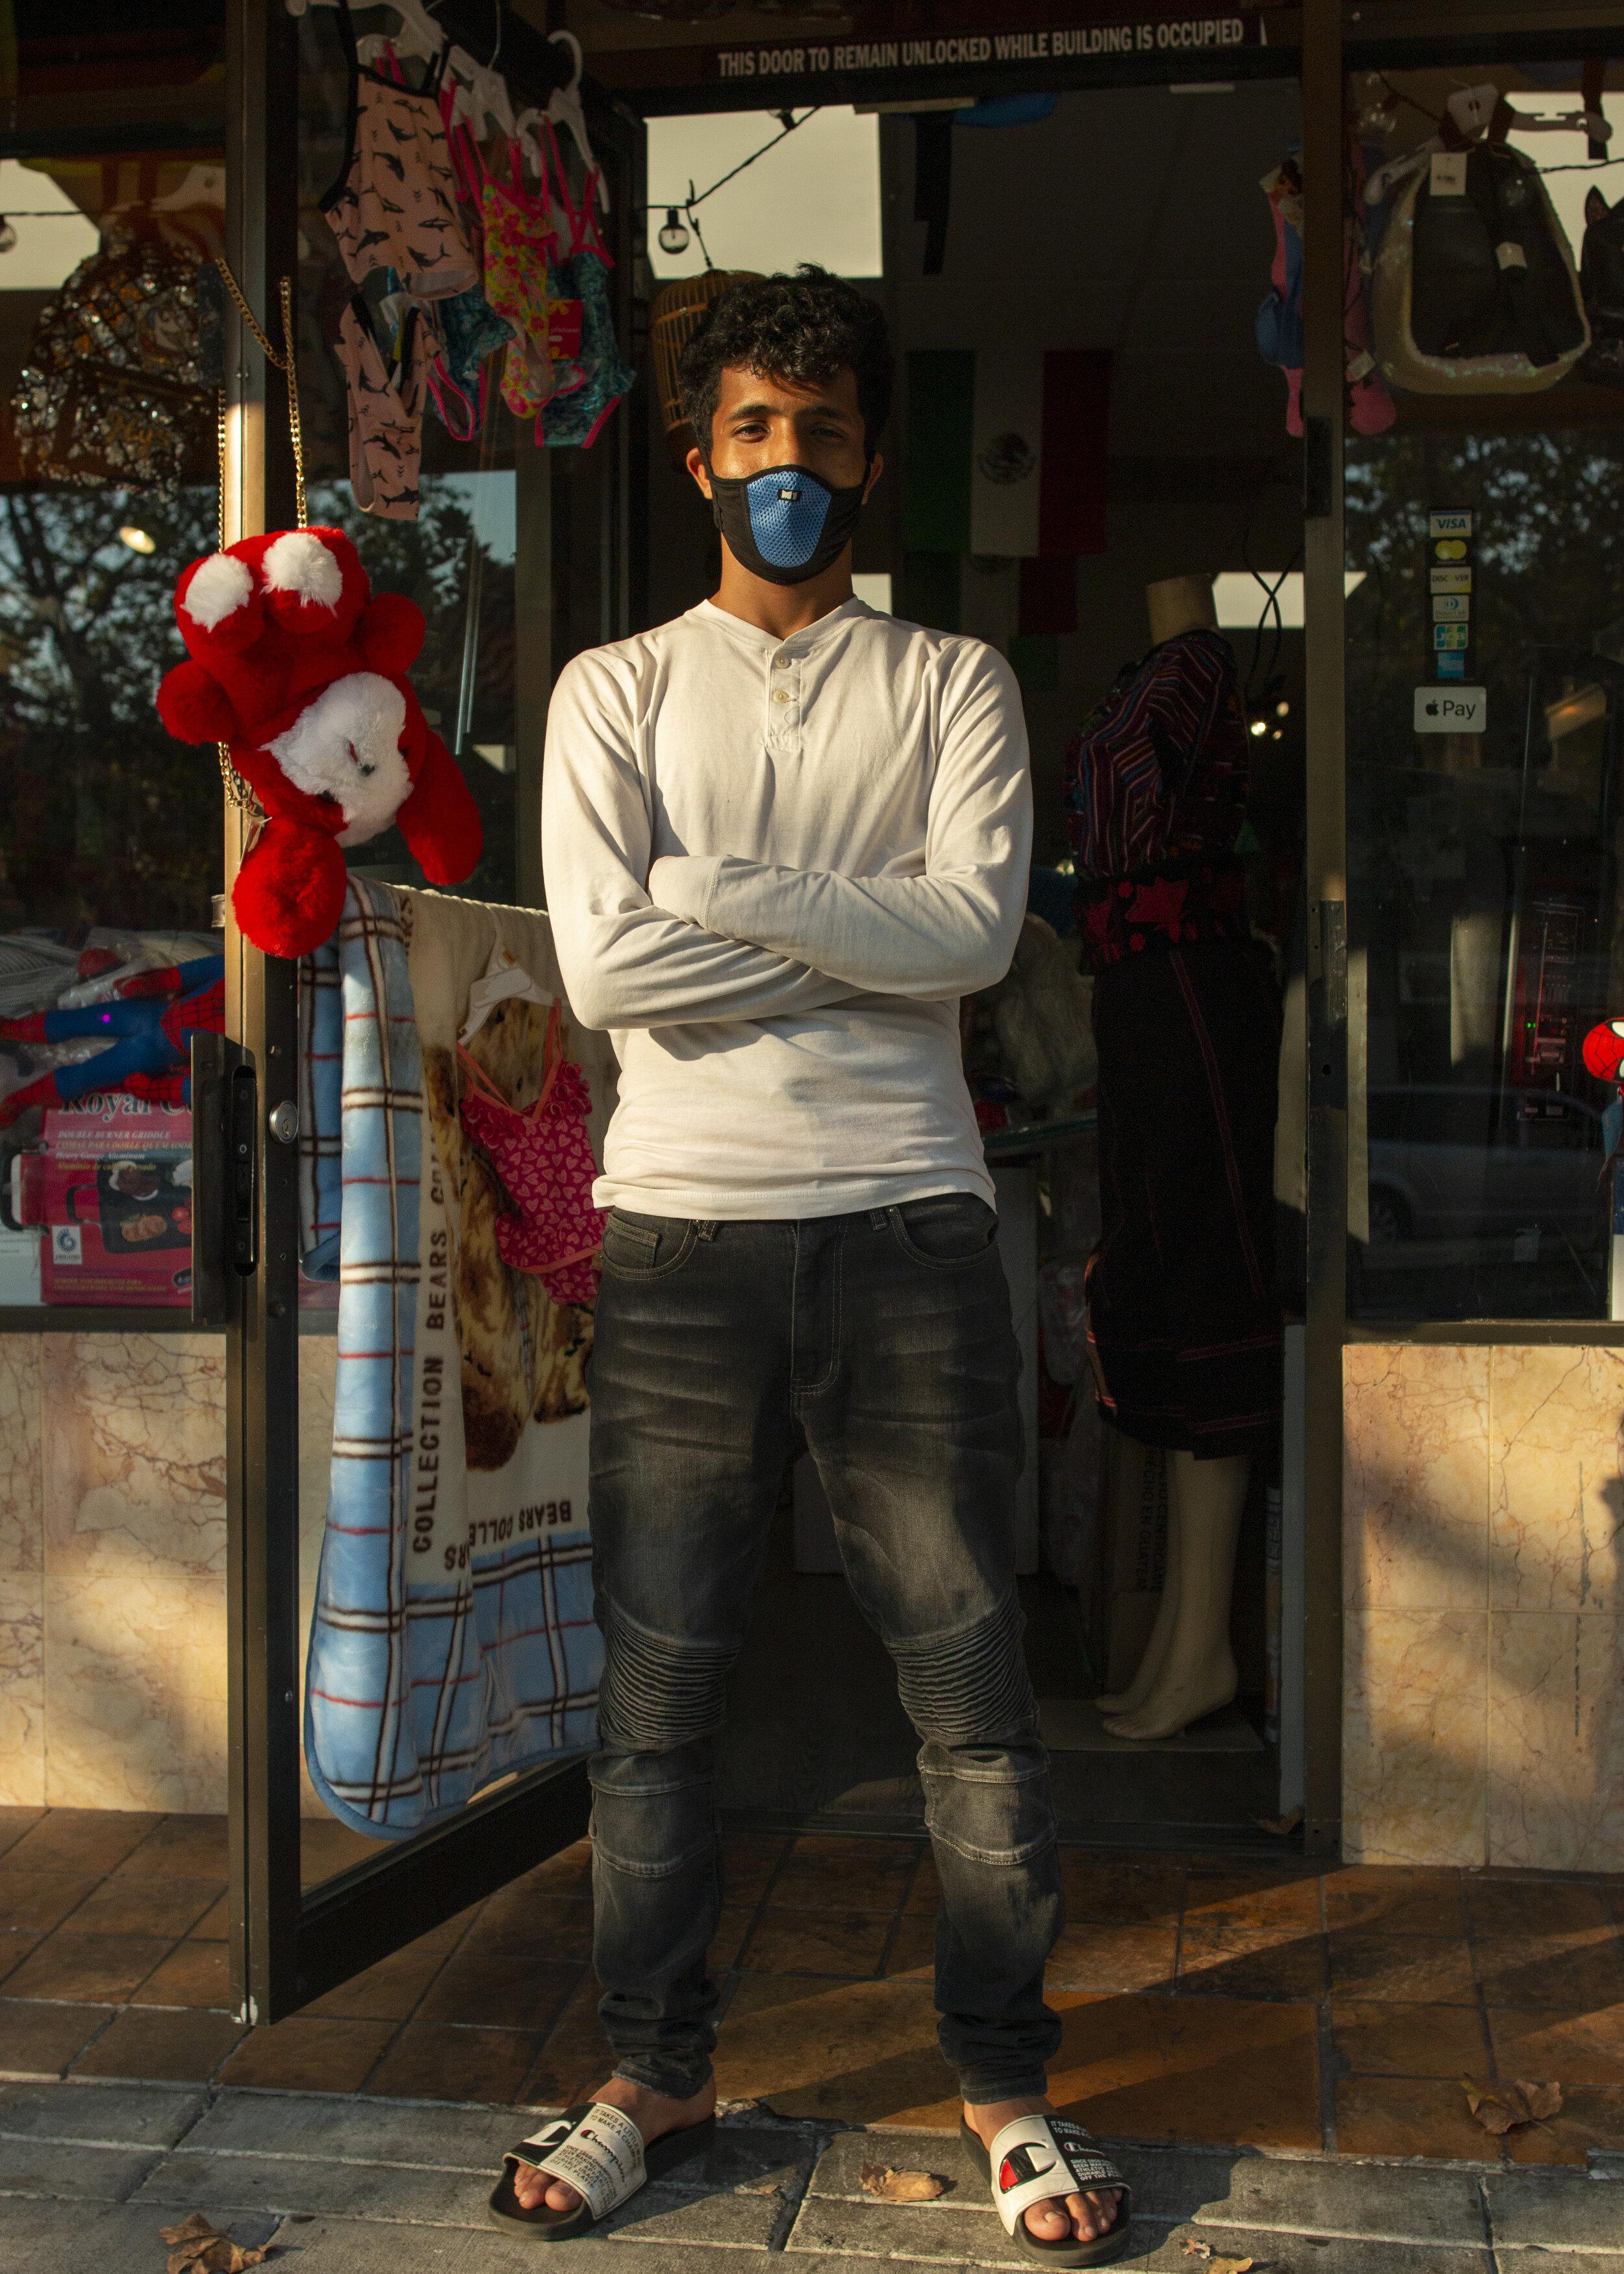 Yemeni-American shopkeeper in the Fruitvale District, a largely Latino commmunity in Oakland, California. 